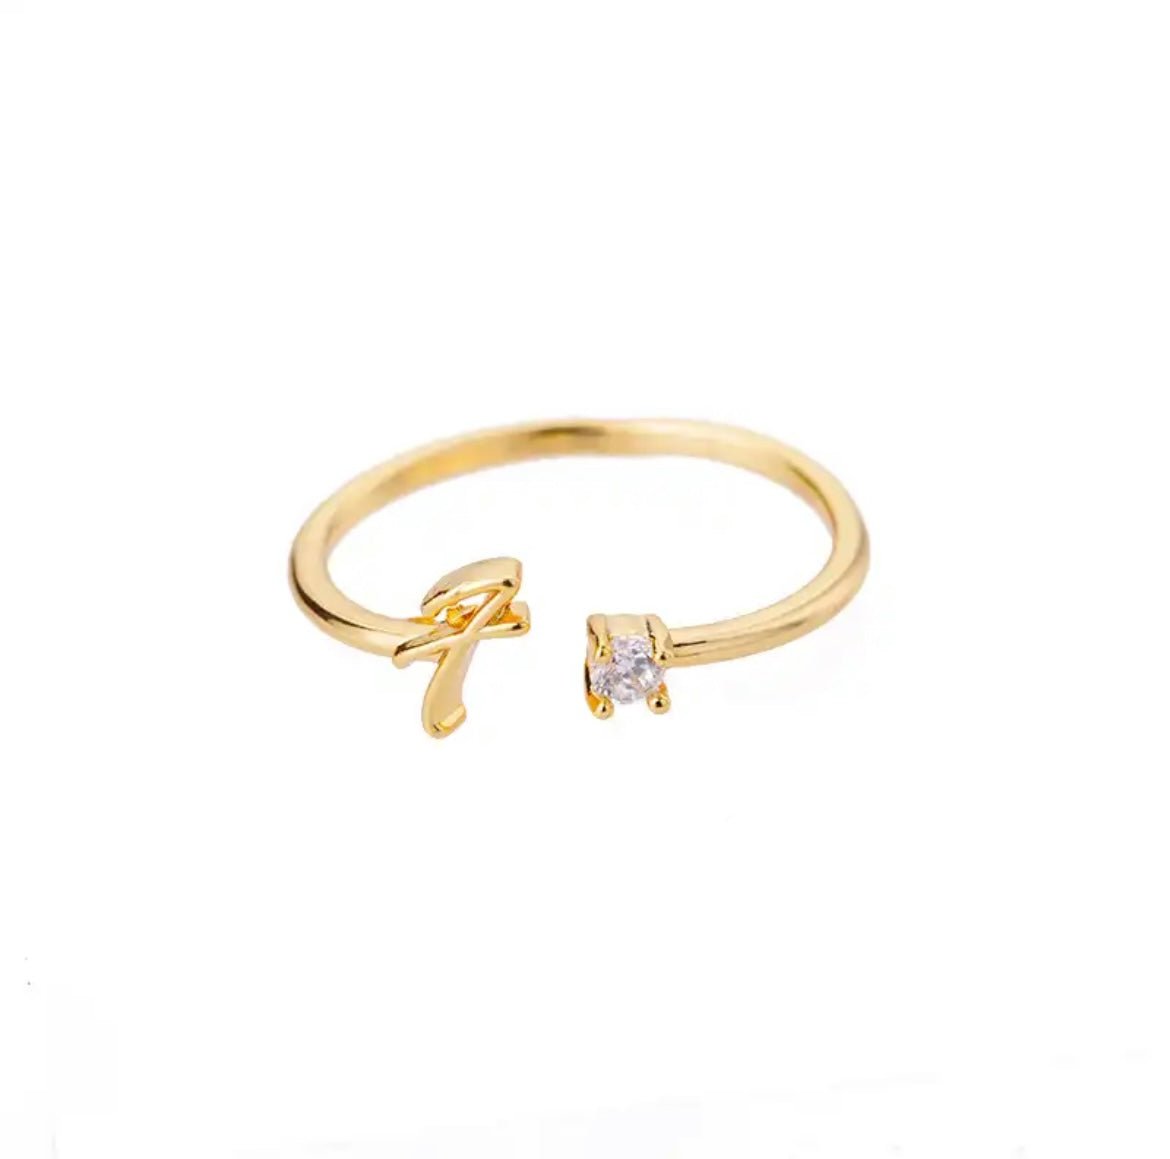 Gold Initial Ring - F - The Little Jewellery Company